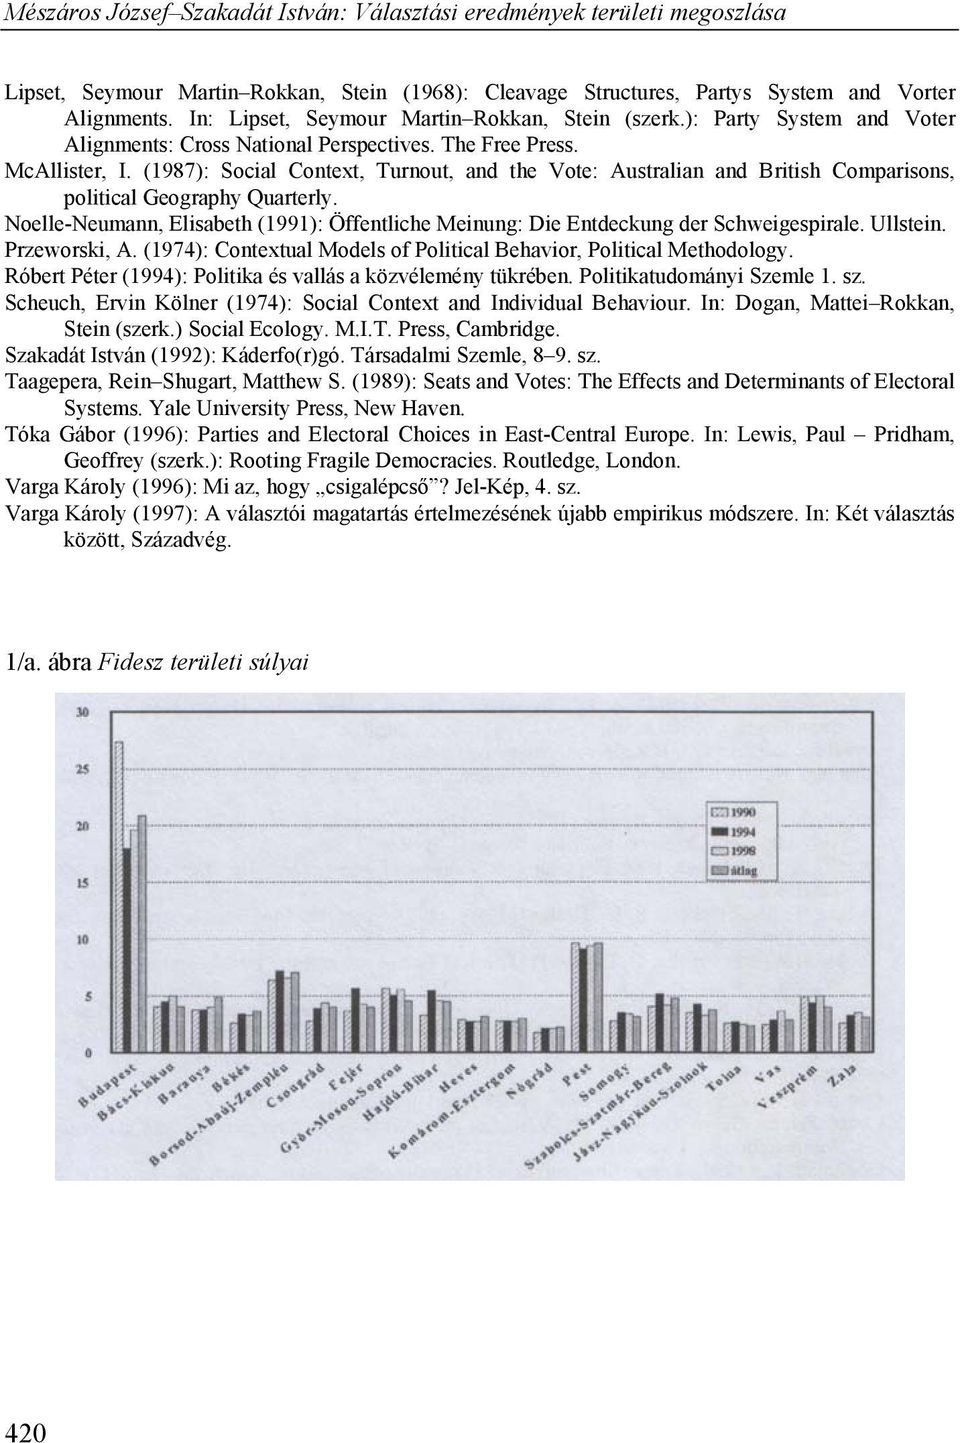 (1987): Social Context, Turnout, and the Vote: Australian and British Comparisons, political Geography Quarterly.